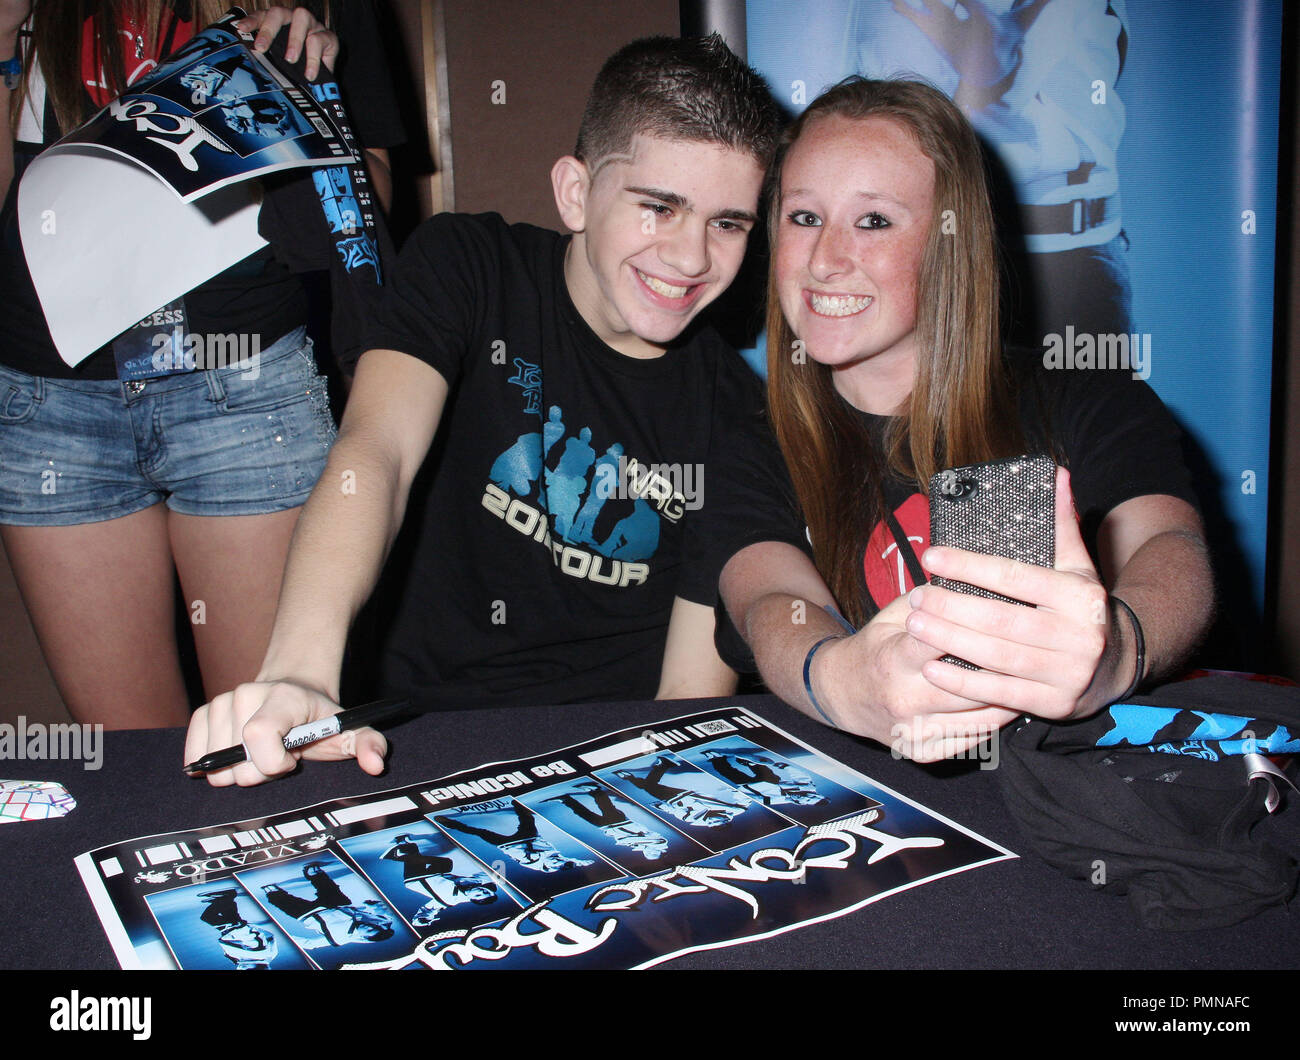 Madison Alamia of the Iconic Boyz at the NRG Dance Project Tour featuring the Iconic Boyz meet and greet and show held at the Woodlake Hotel in Sacramento, Ca on Friday, February 24, 2012. Photo by Peter Gonzaga Pacific Rim Photo Press/ PictureLux Stock Photo